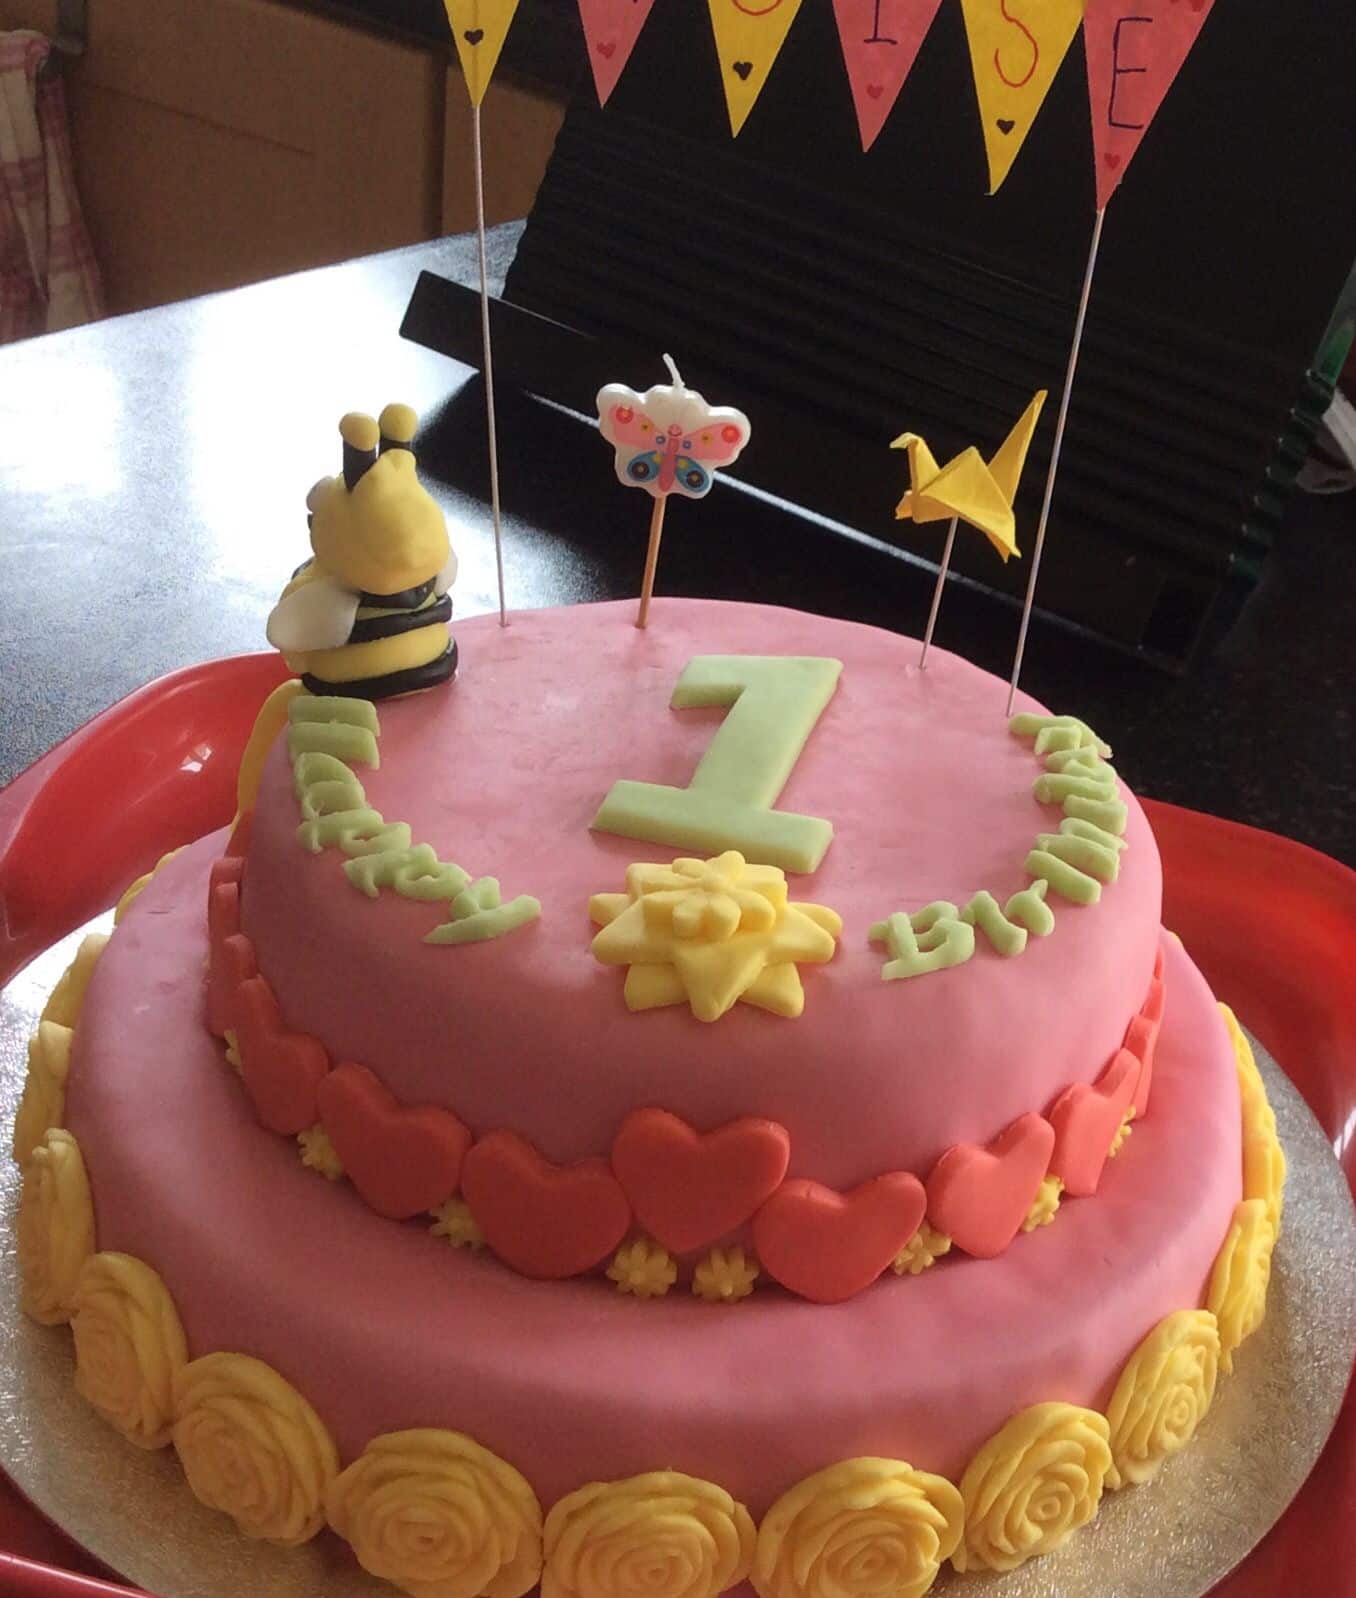 Birthday cake for a one year old girl!